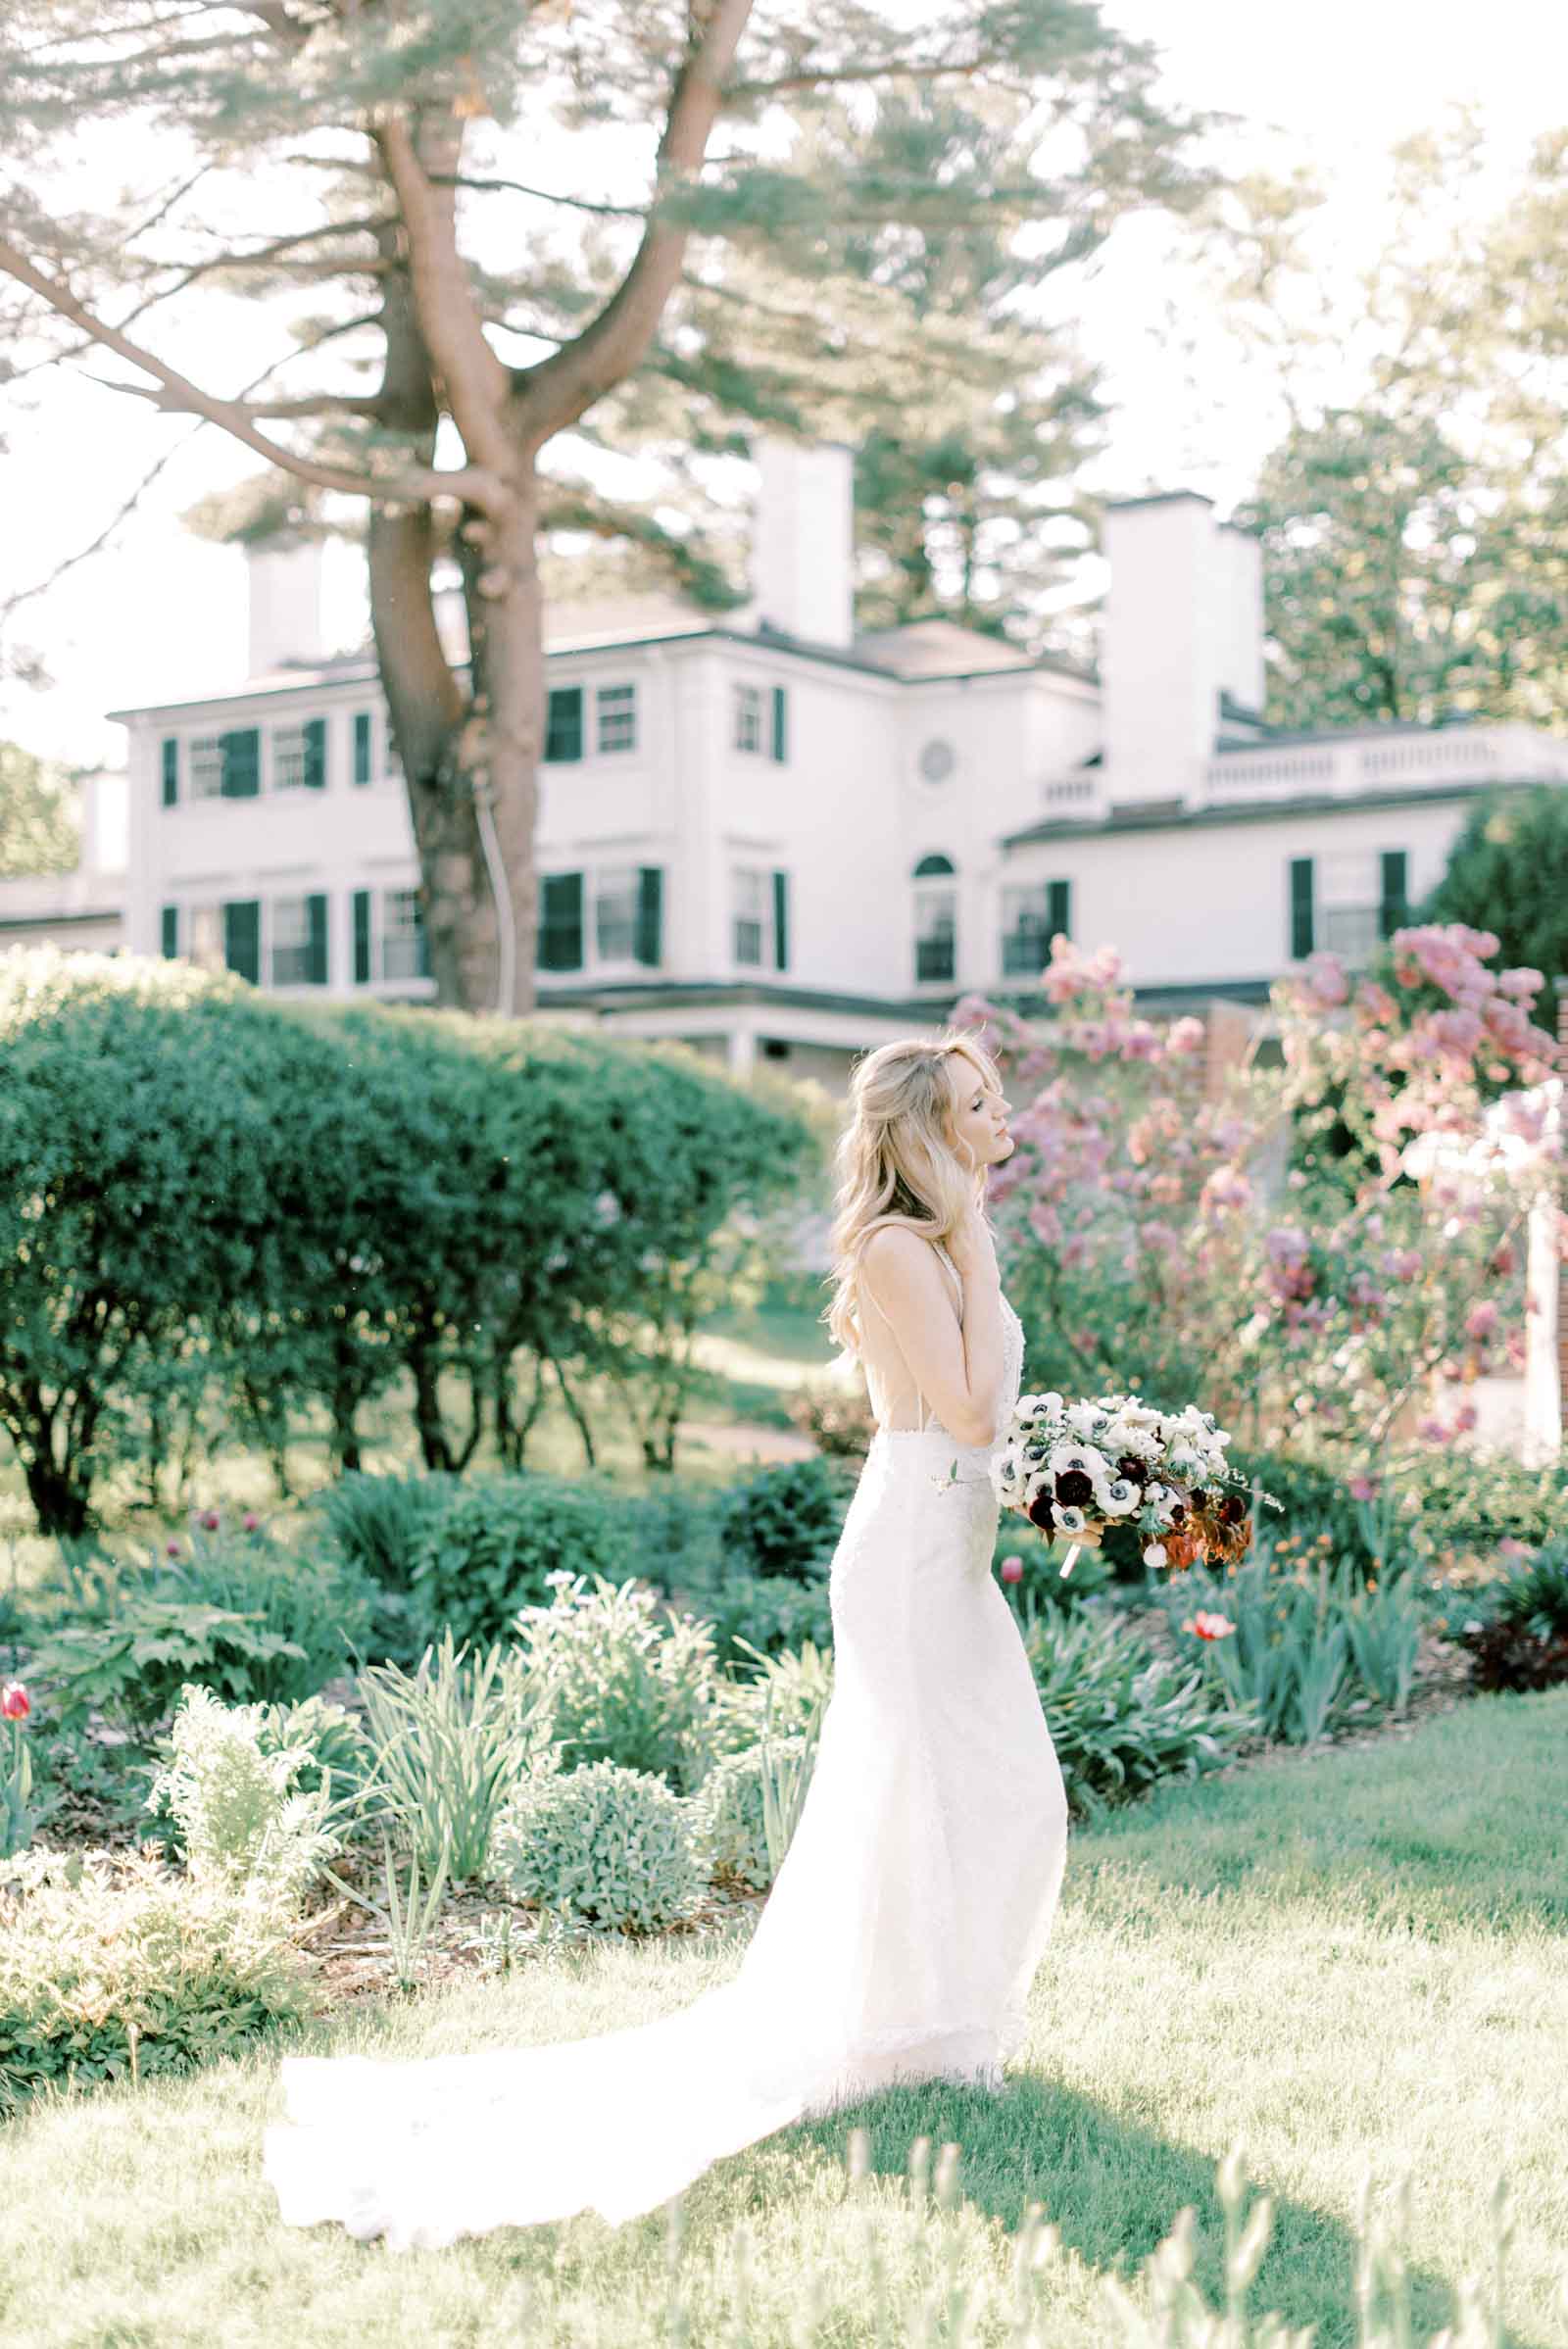 Stunning bride closing her eyes and showing her side profile at the garden of her New England wedding venue, photographed by Marcela Diaz